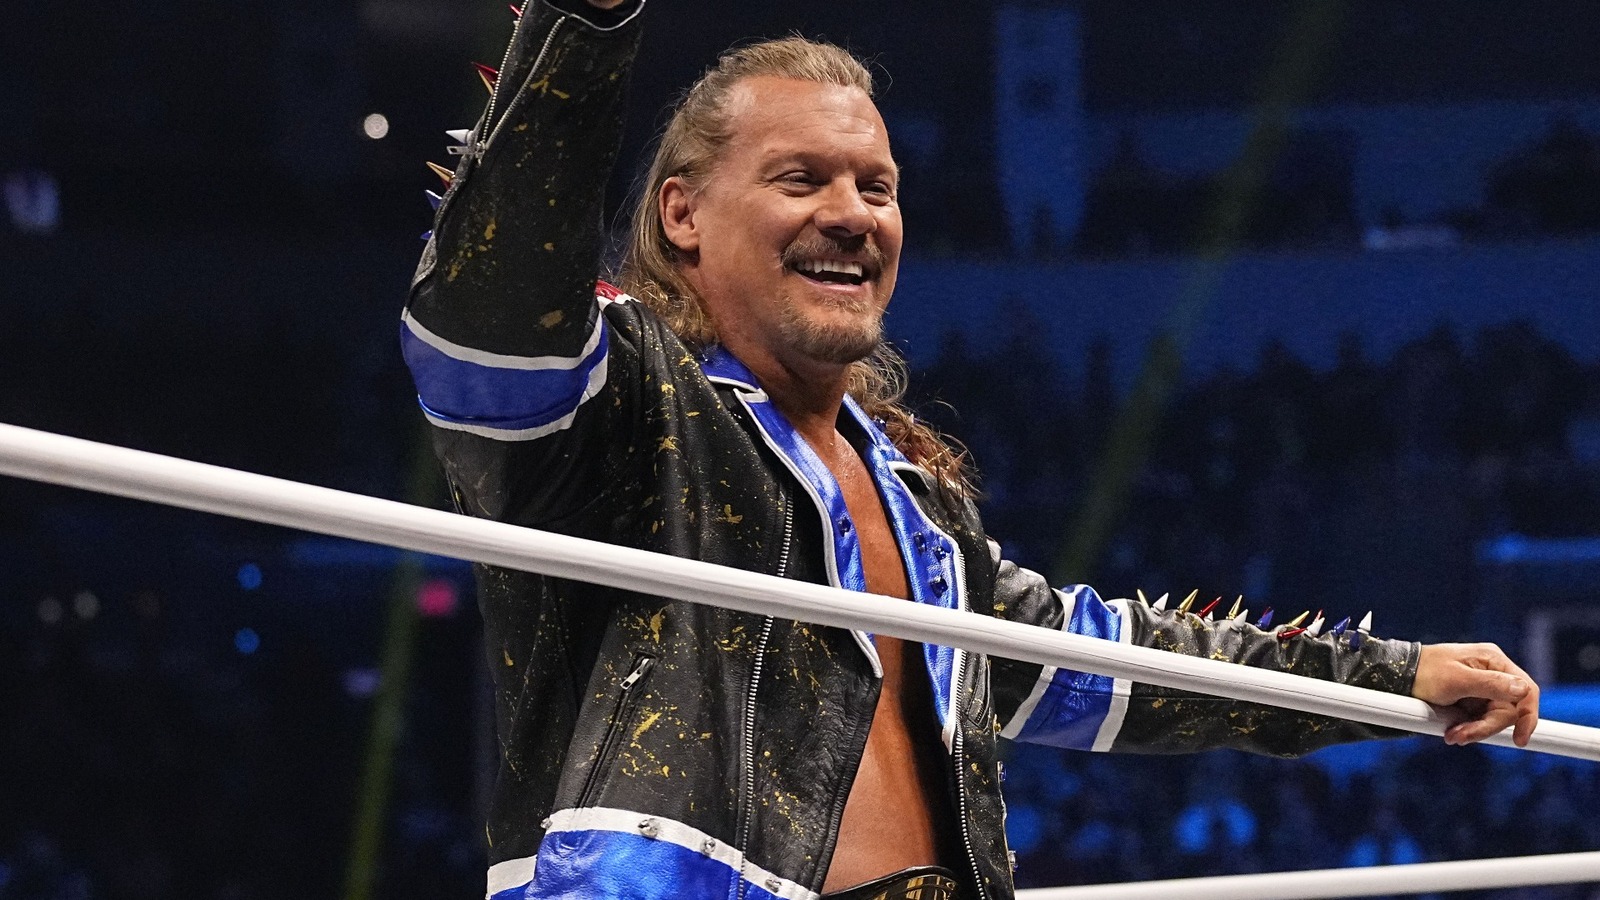 Jim Ross Discusses Getting Chris Jericho Over With Former WWE Boss Vince McMahon